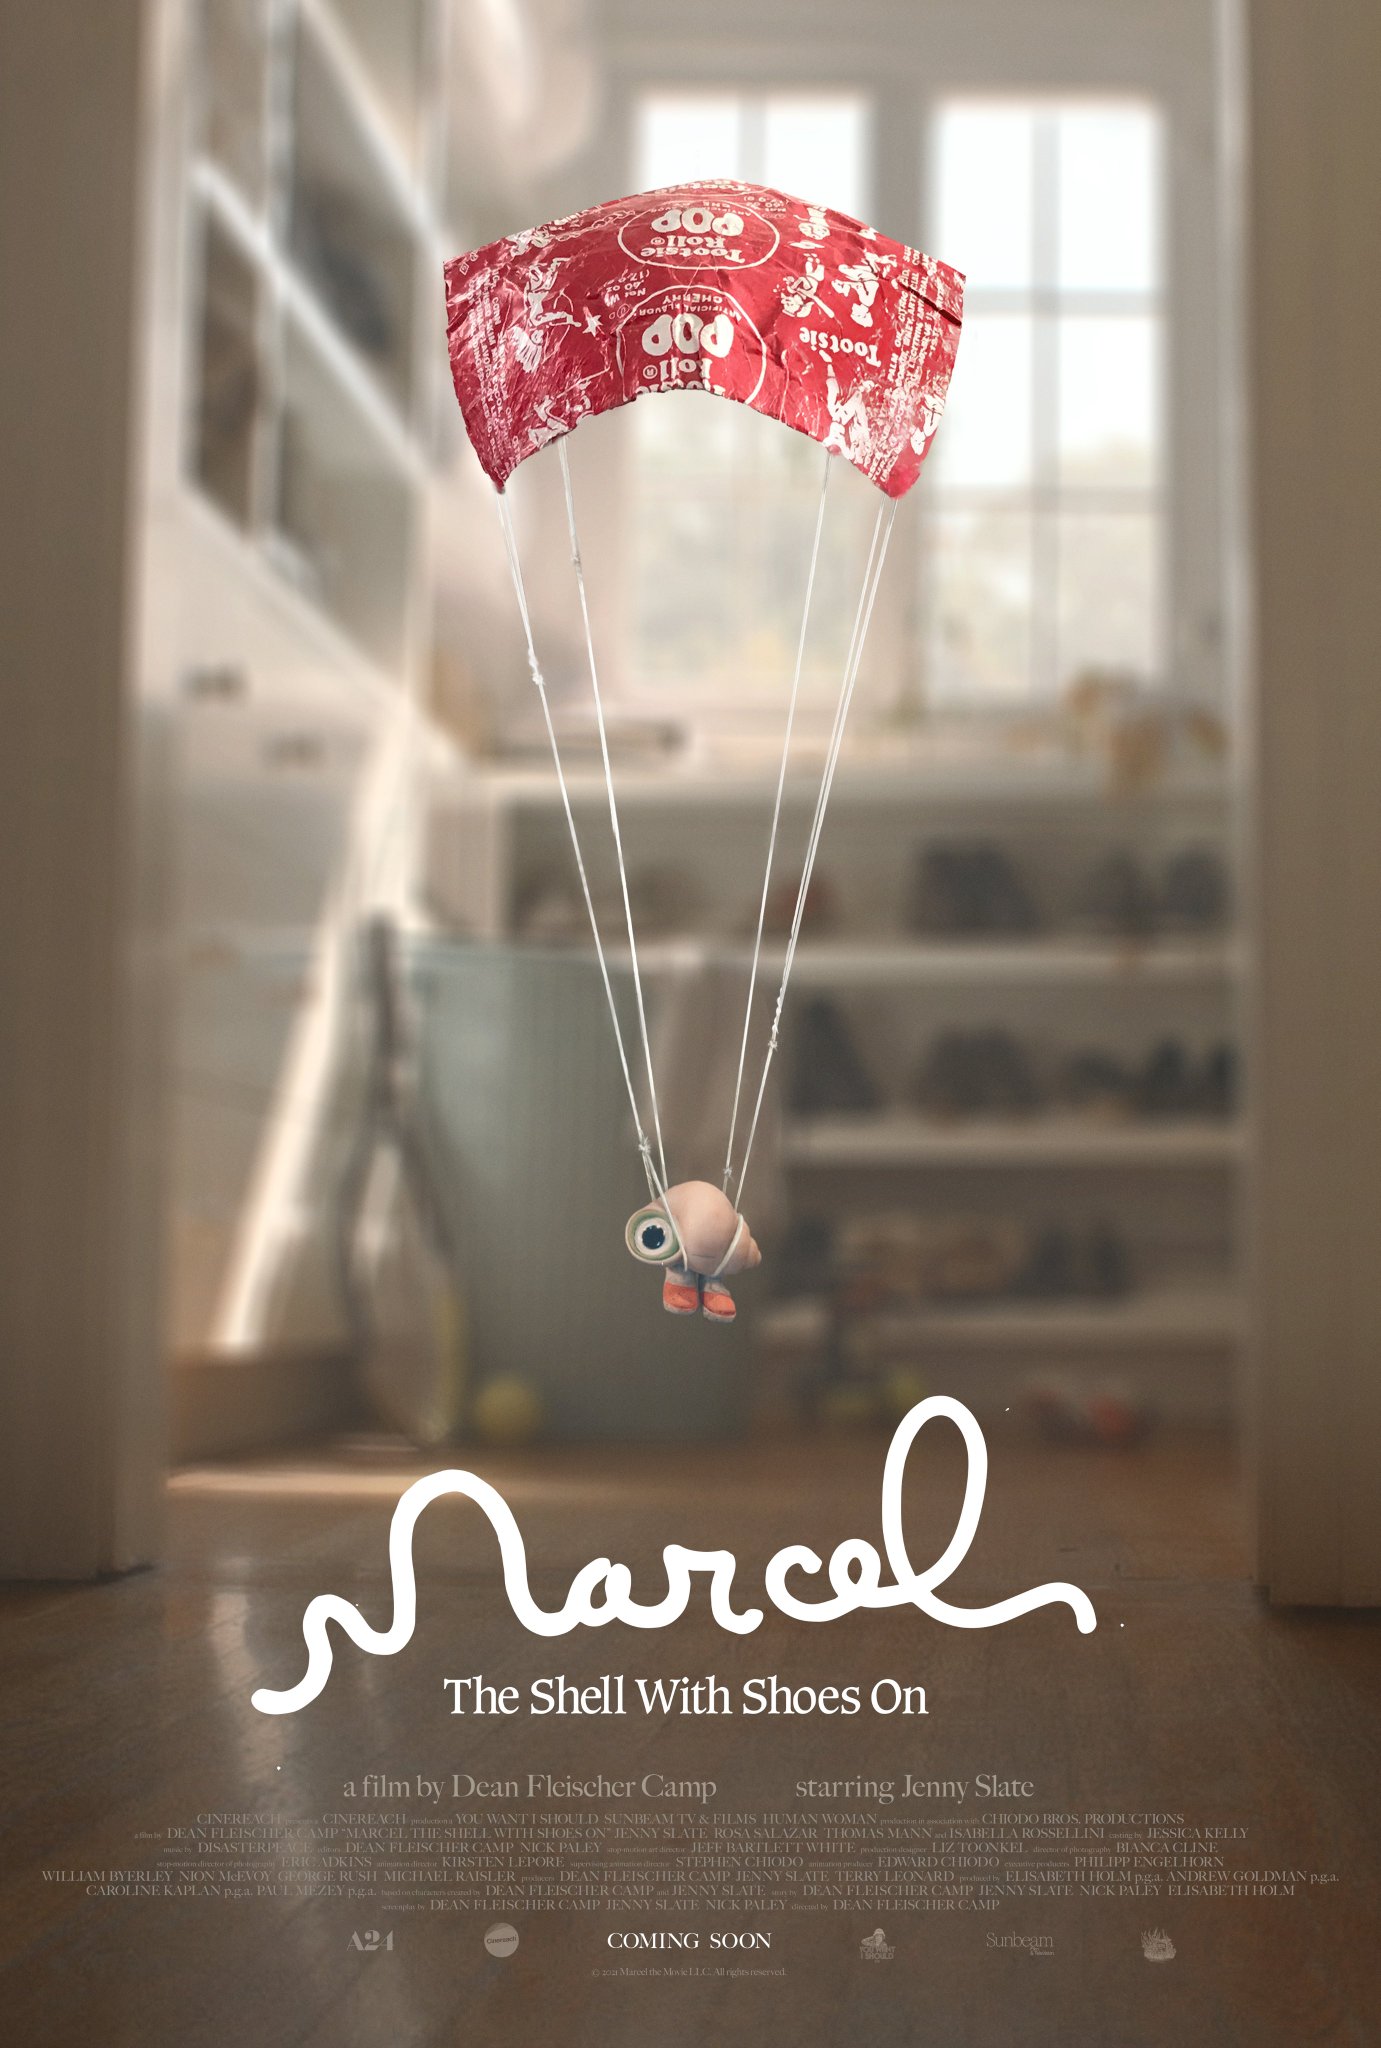 [NEWS] Il trailer di Marcel The Shell With Shoes On